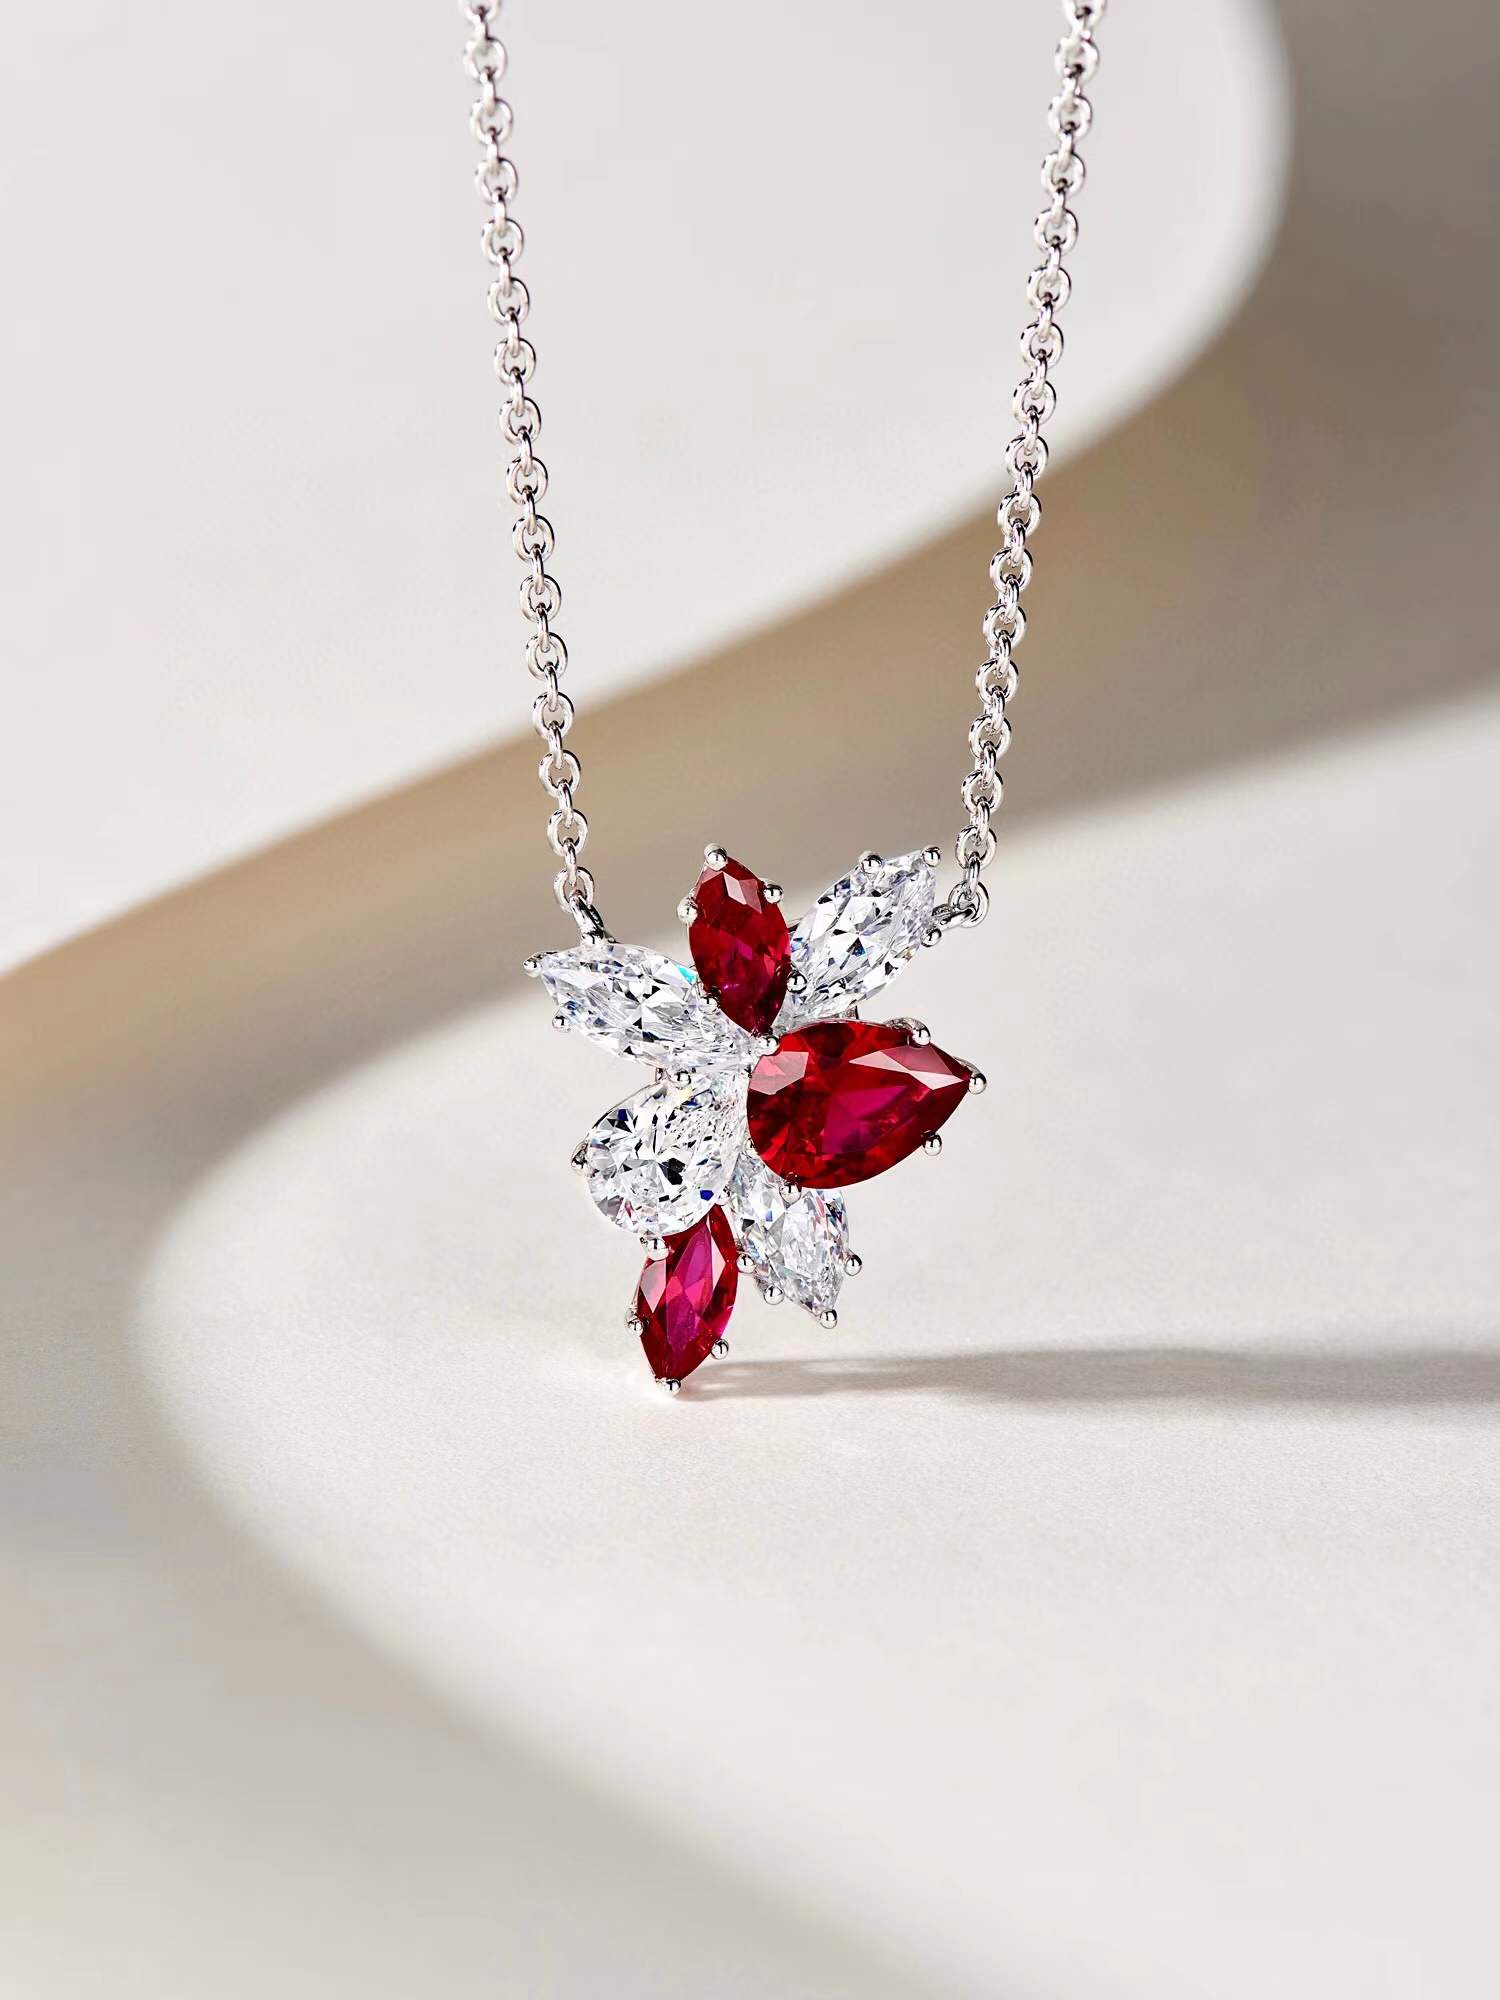 S925 Sterling Silver Ruby Jewelry Sets For Women Crystal Zircon Leaves Necklace Wedding Red Gem Stone Earring Water Drop Design